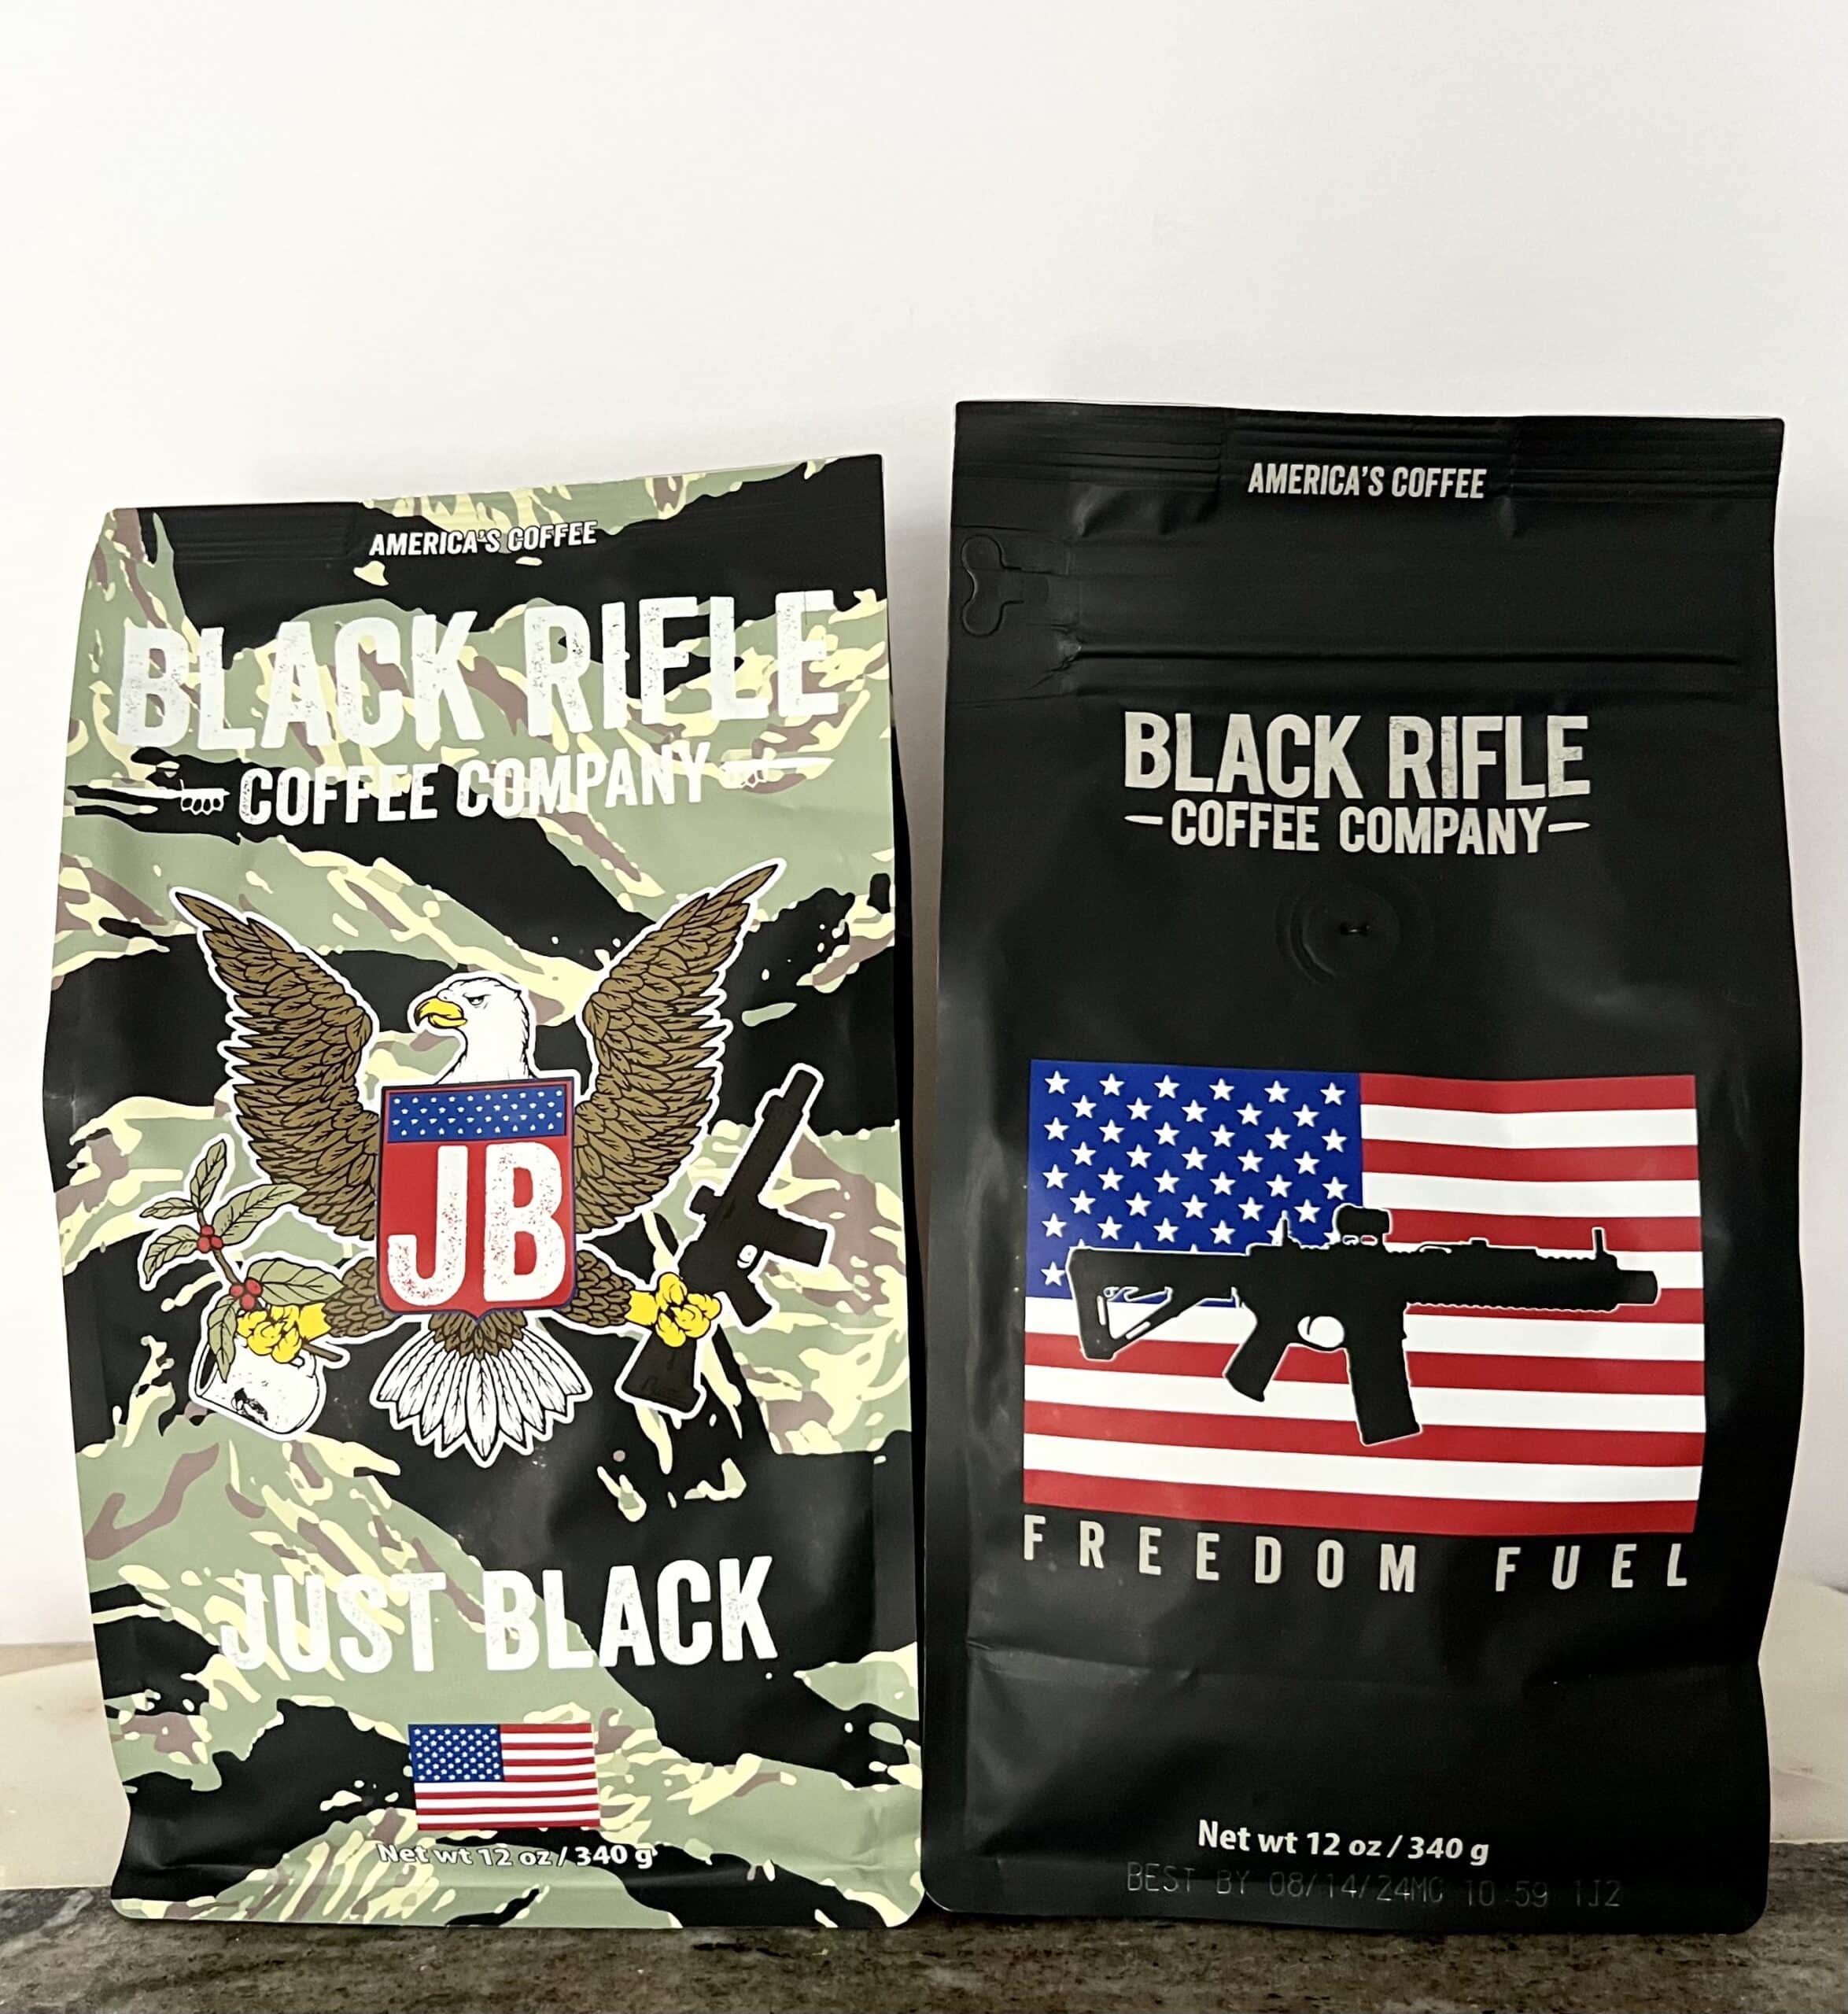 Two different packs of Black Rifle Coffee on the table